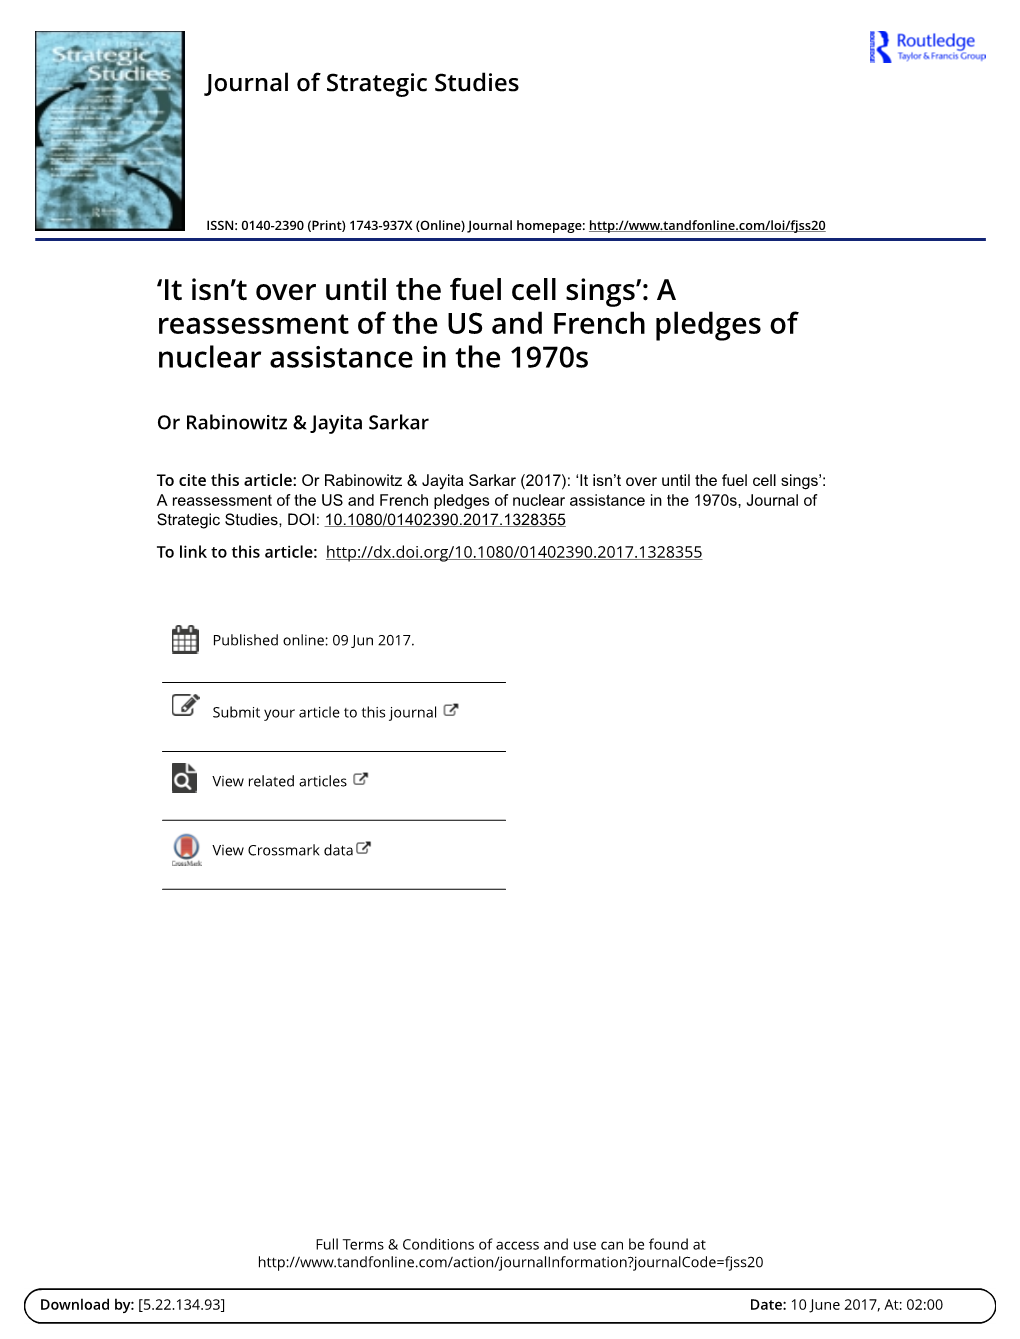 A Reassessment of the US and French Pledges of Nuclear Assistance in the 1970S